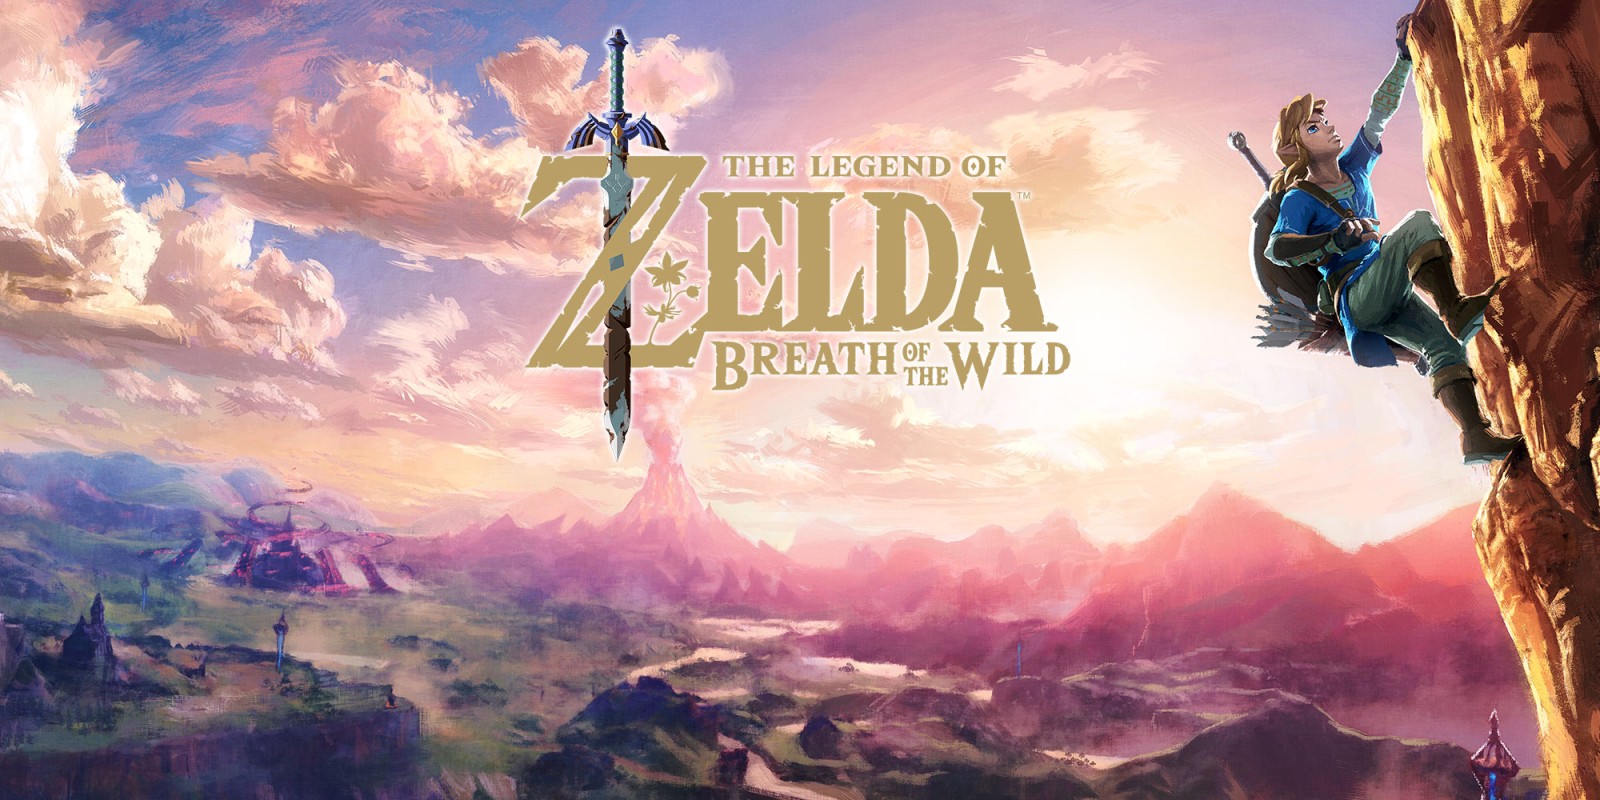 alistair mackie recommends zelda breath of the wild pics pic